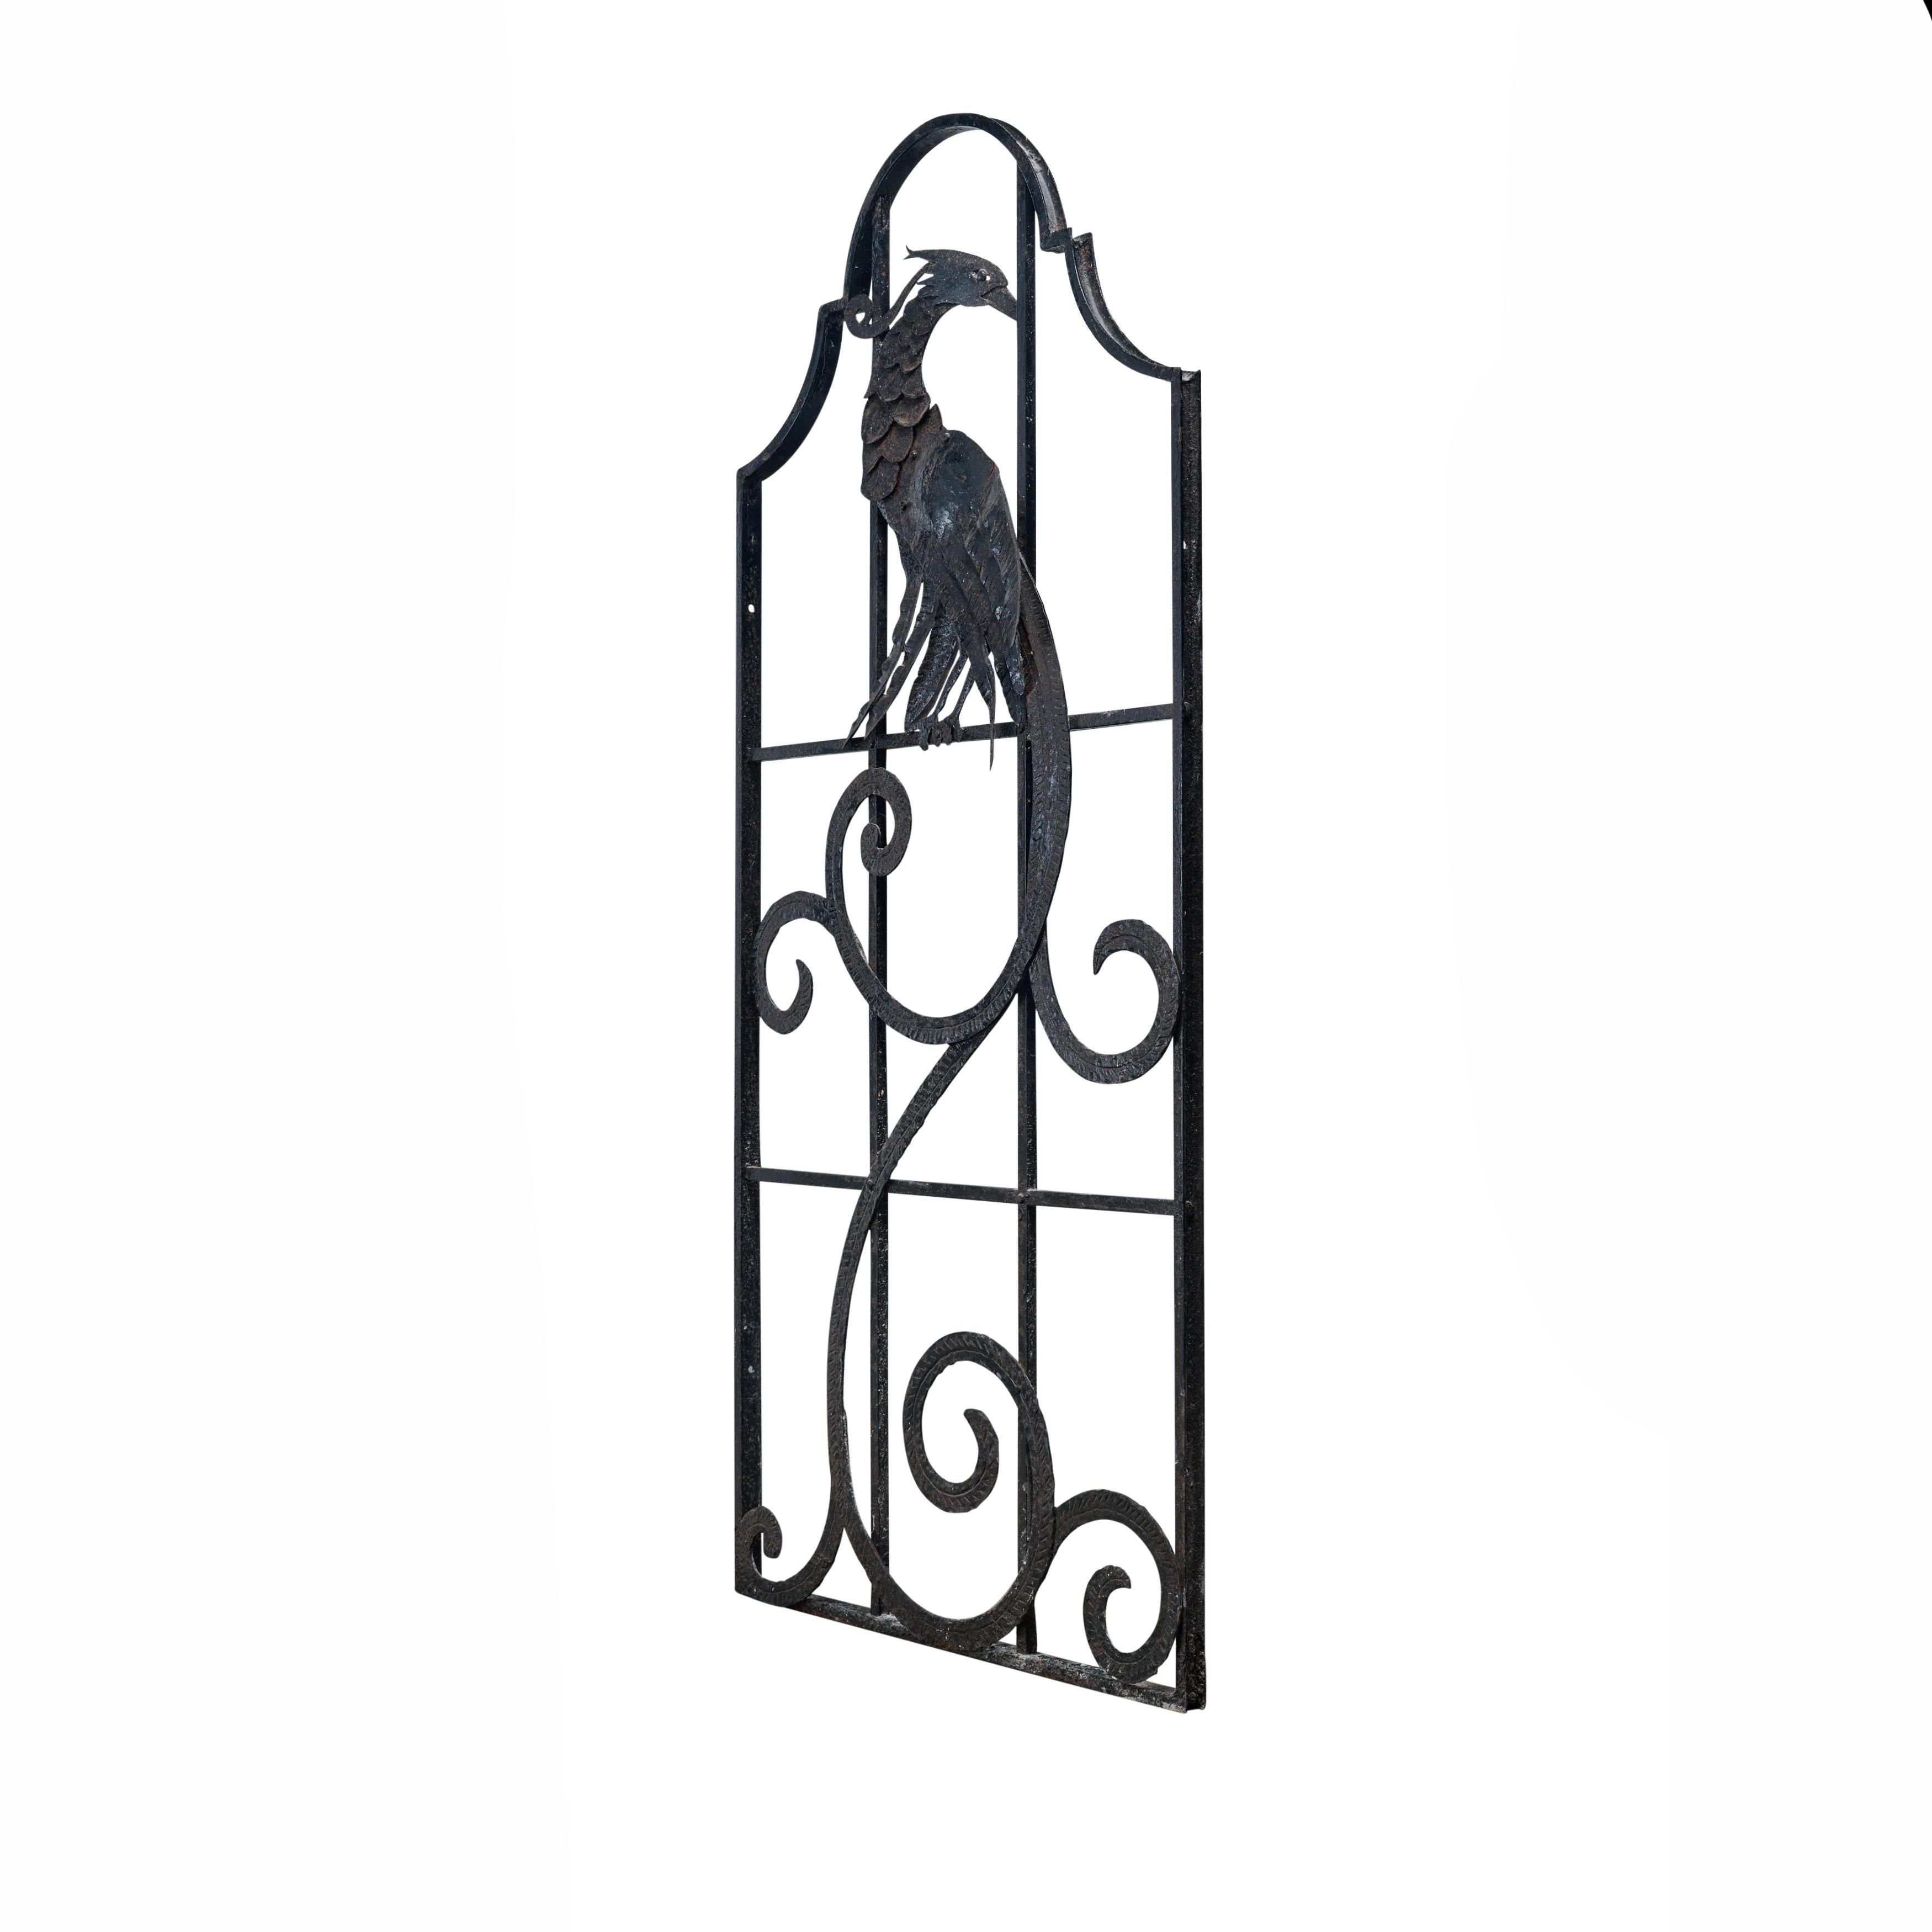 Wrought Iron Arch Top Decorative Grill With Fantastic Bird Design In Good Condition For Sale In Chicago, IL